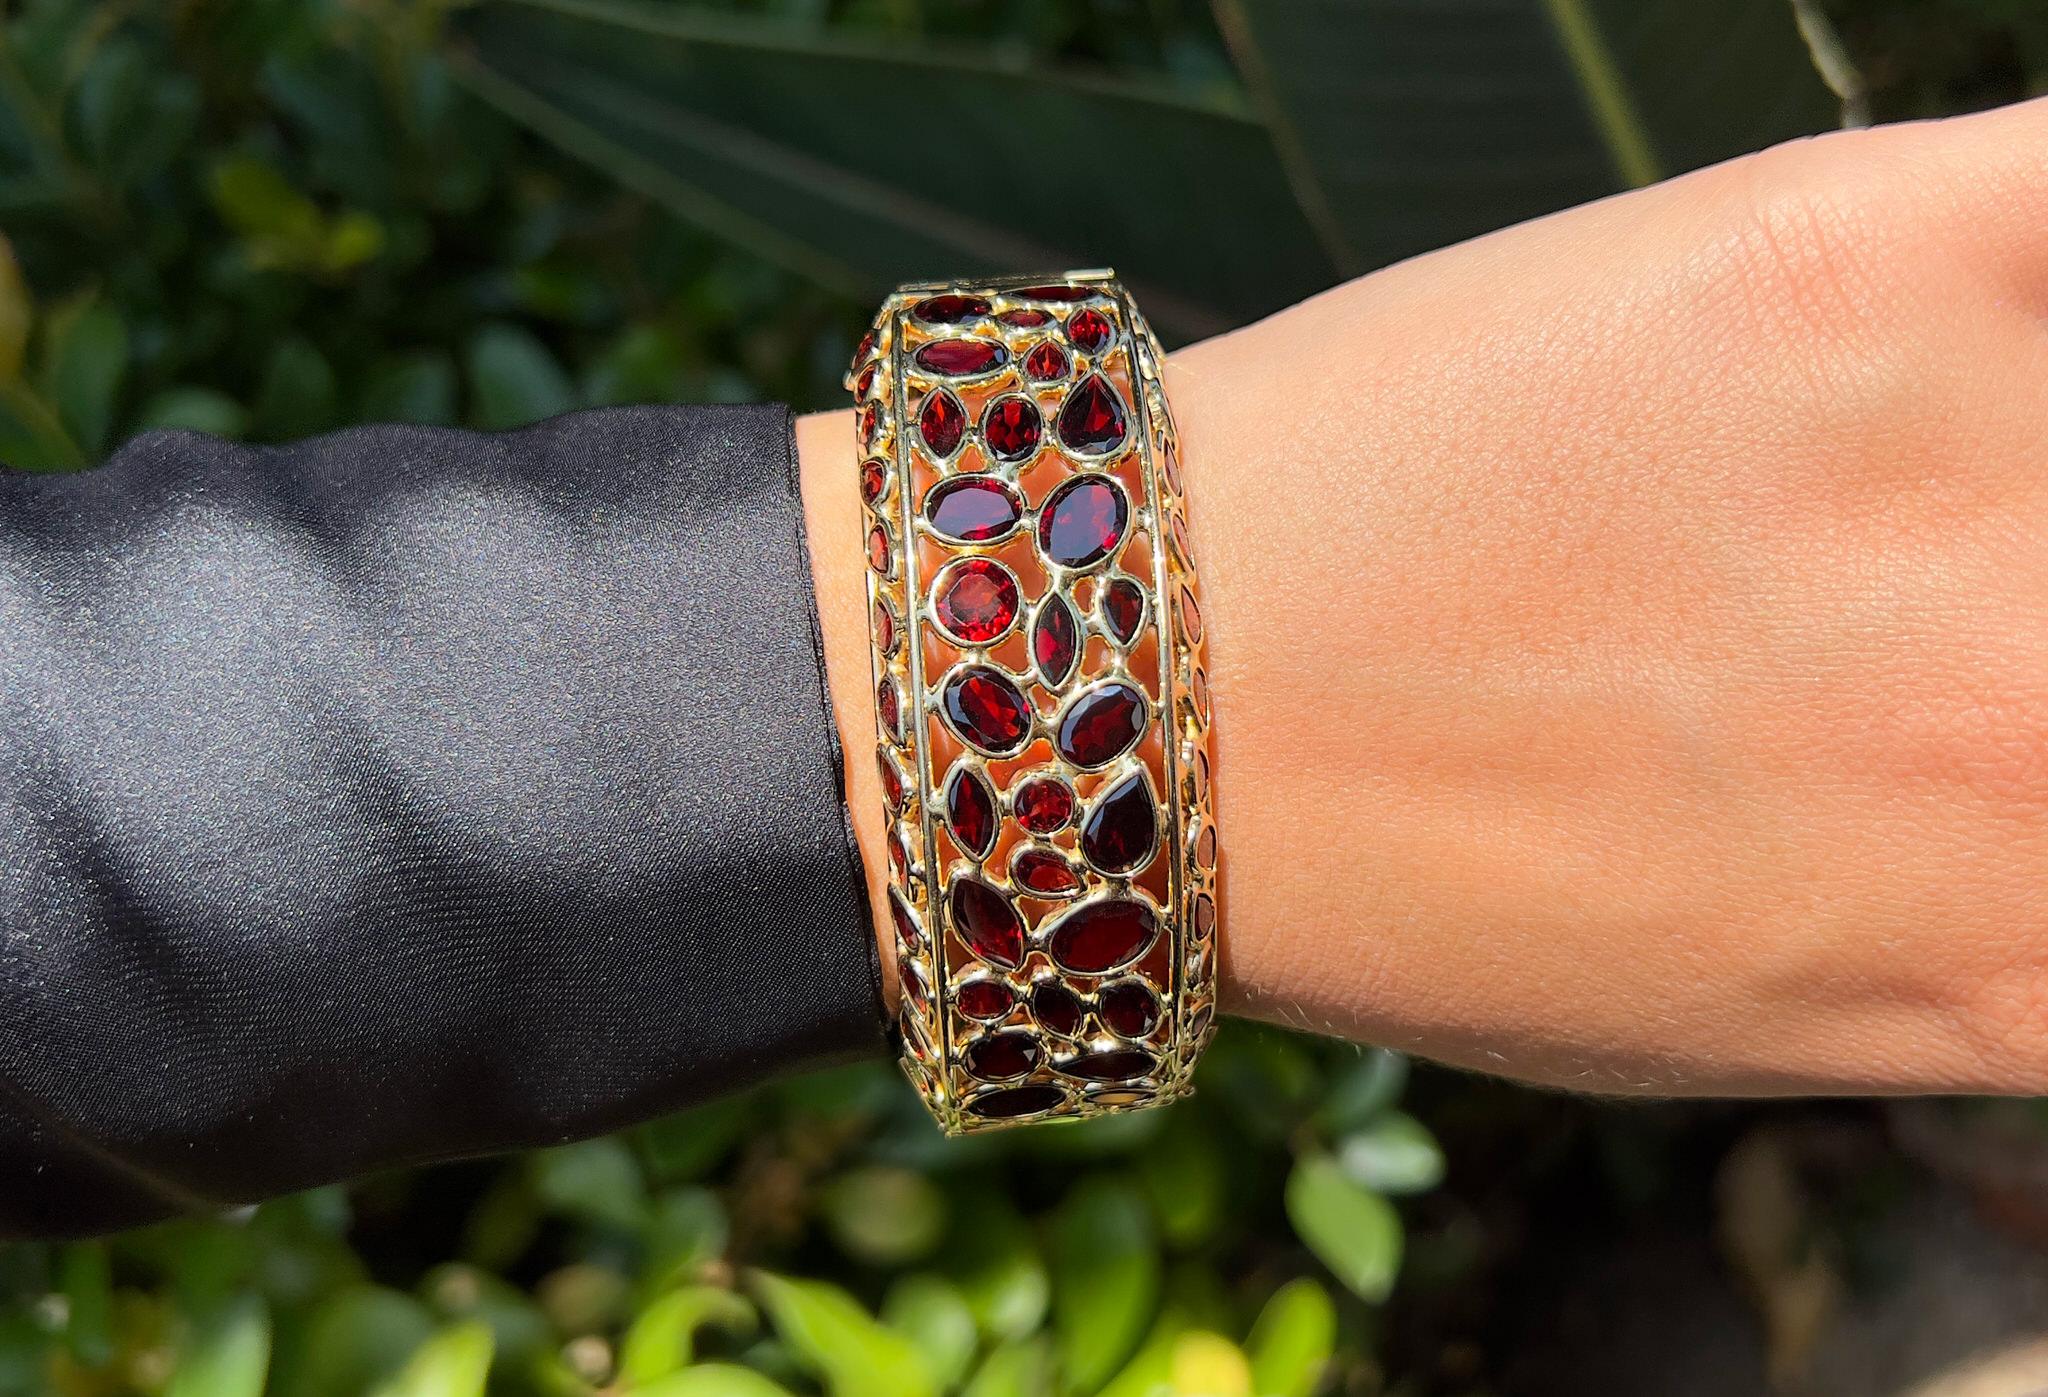 Important Cougar Bangle Bracelet Red Garnets 100 Carats 14K Yellow Gold In Excellent Condition For Sale In Laguna Niguel, CA